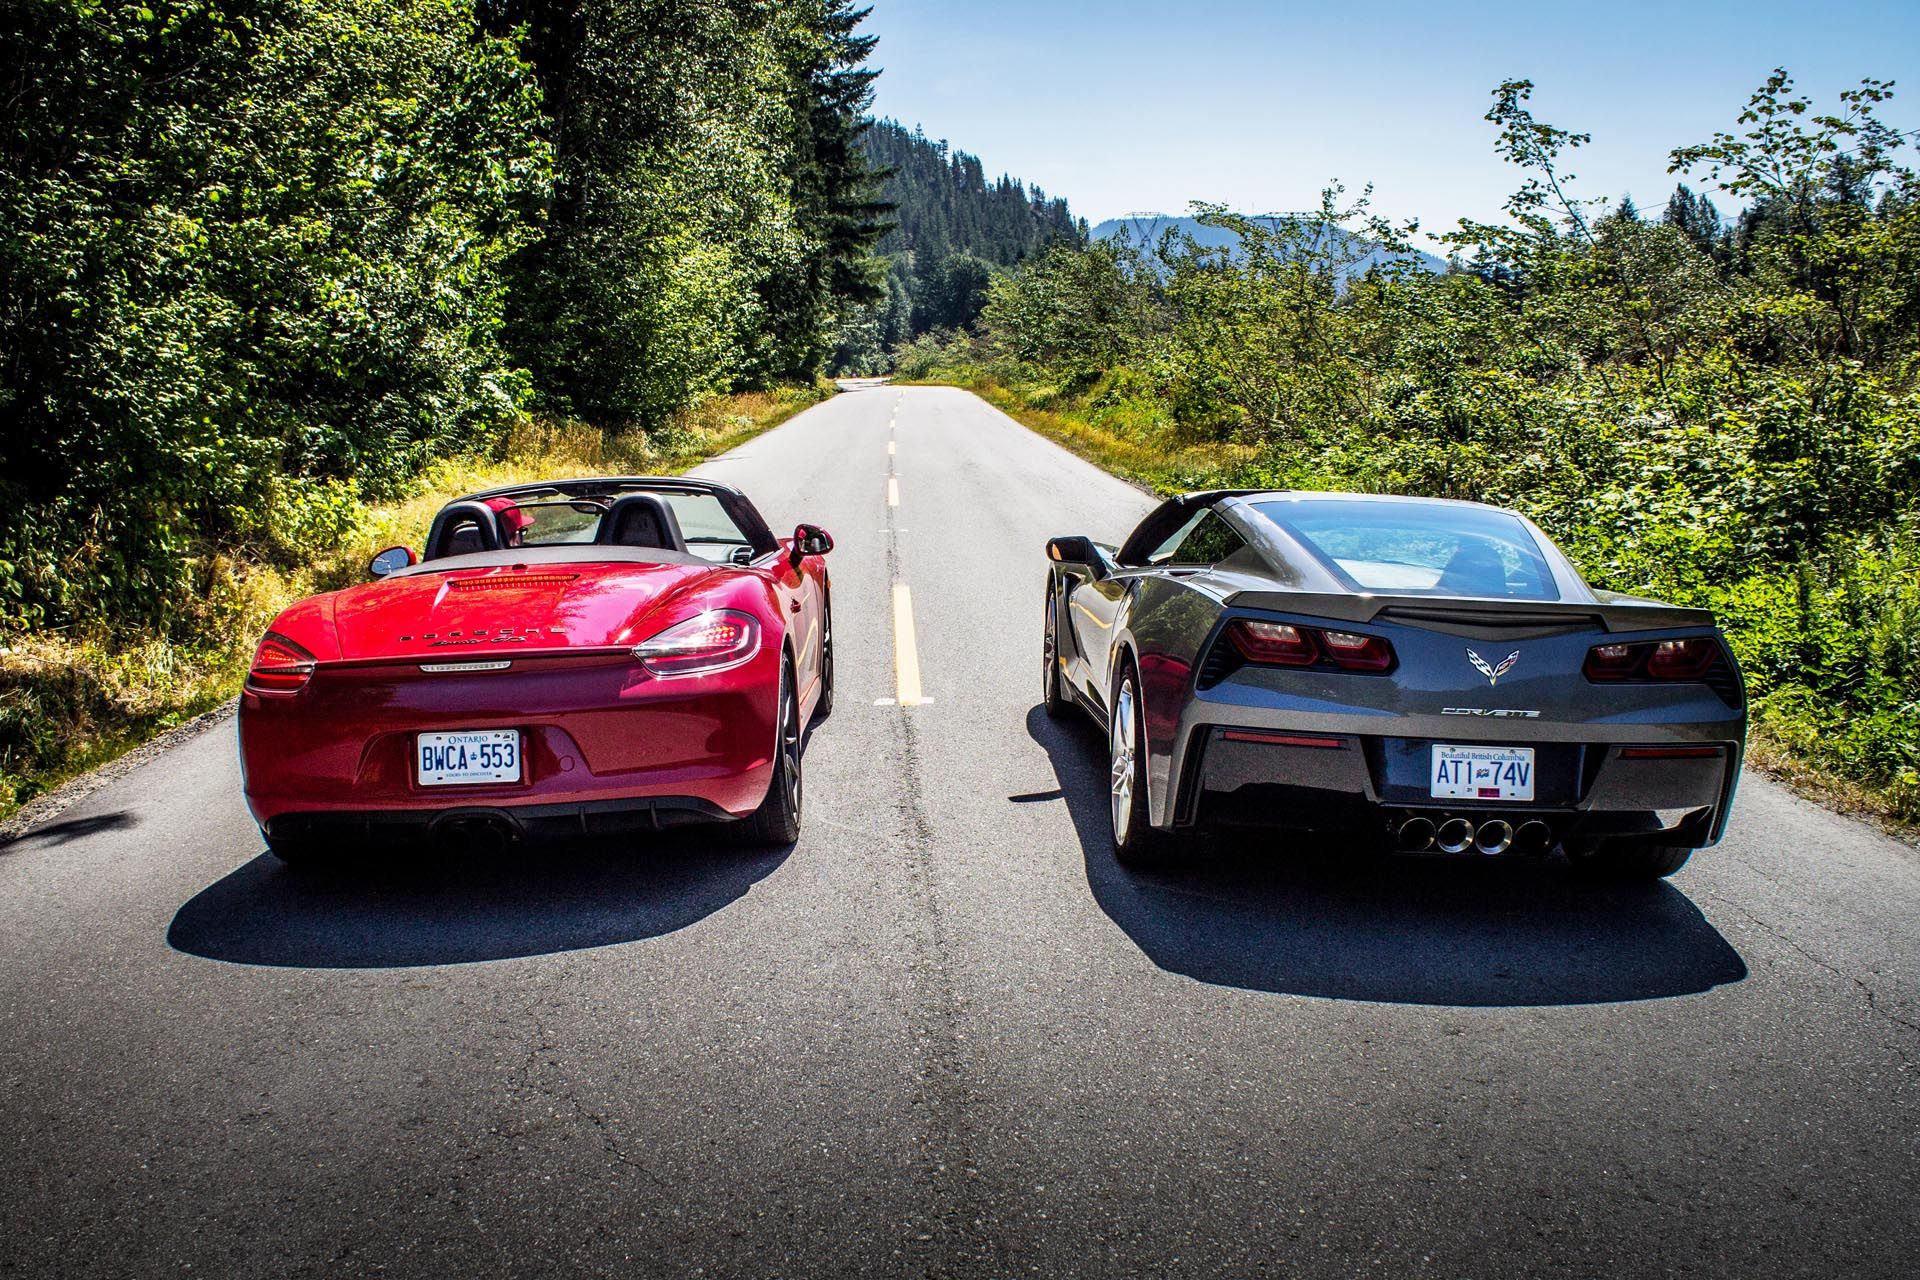 Corvette and Boxster drive down a deserted road in the mountains